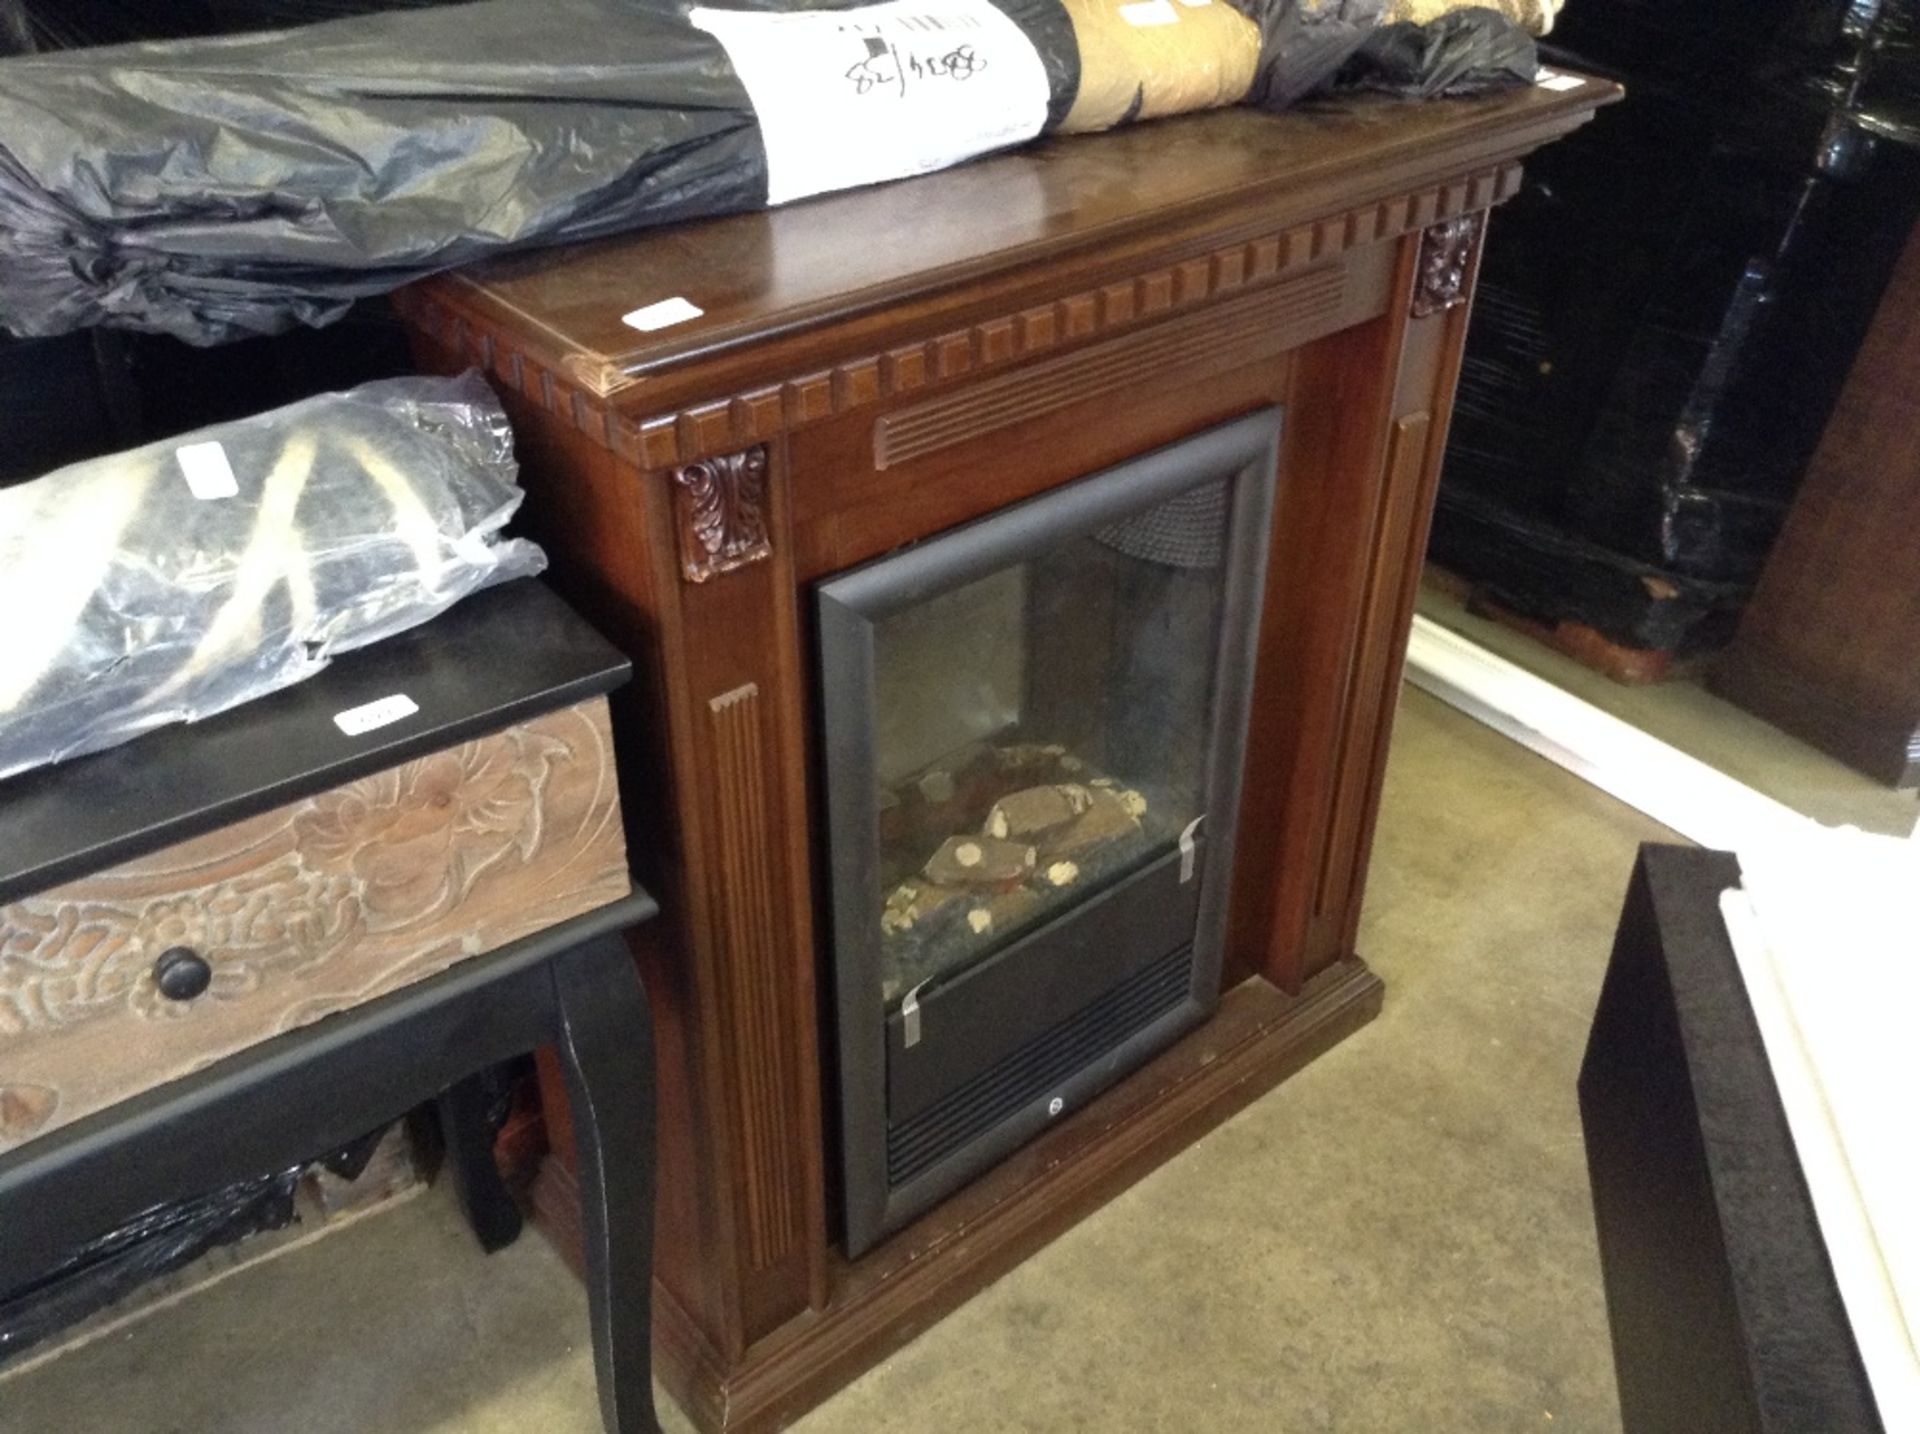 Belfry Heating Melva Electric Stove and surround d